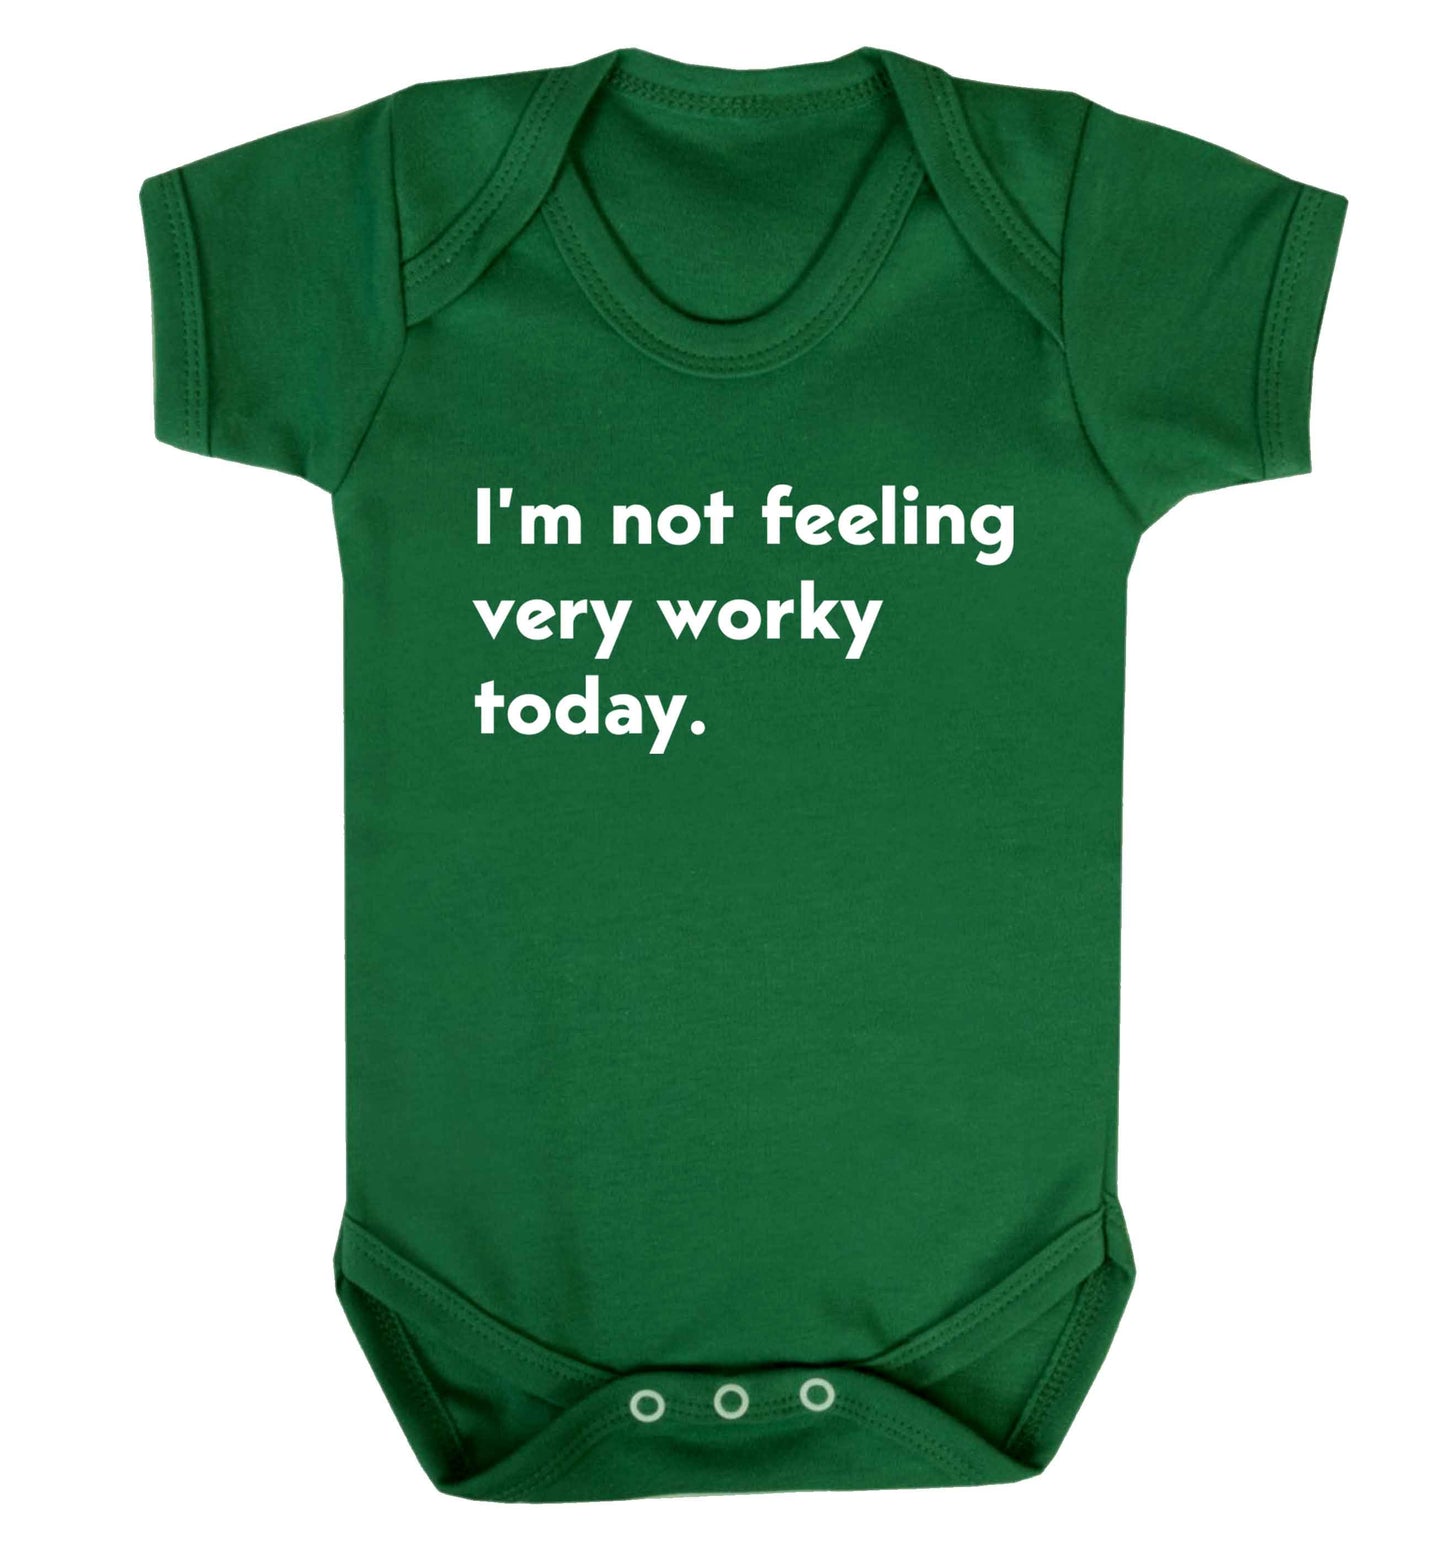 I'm not feeling very worky today Baby Vest green 18-24 months